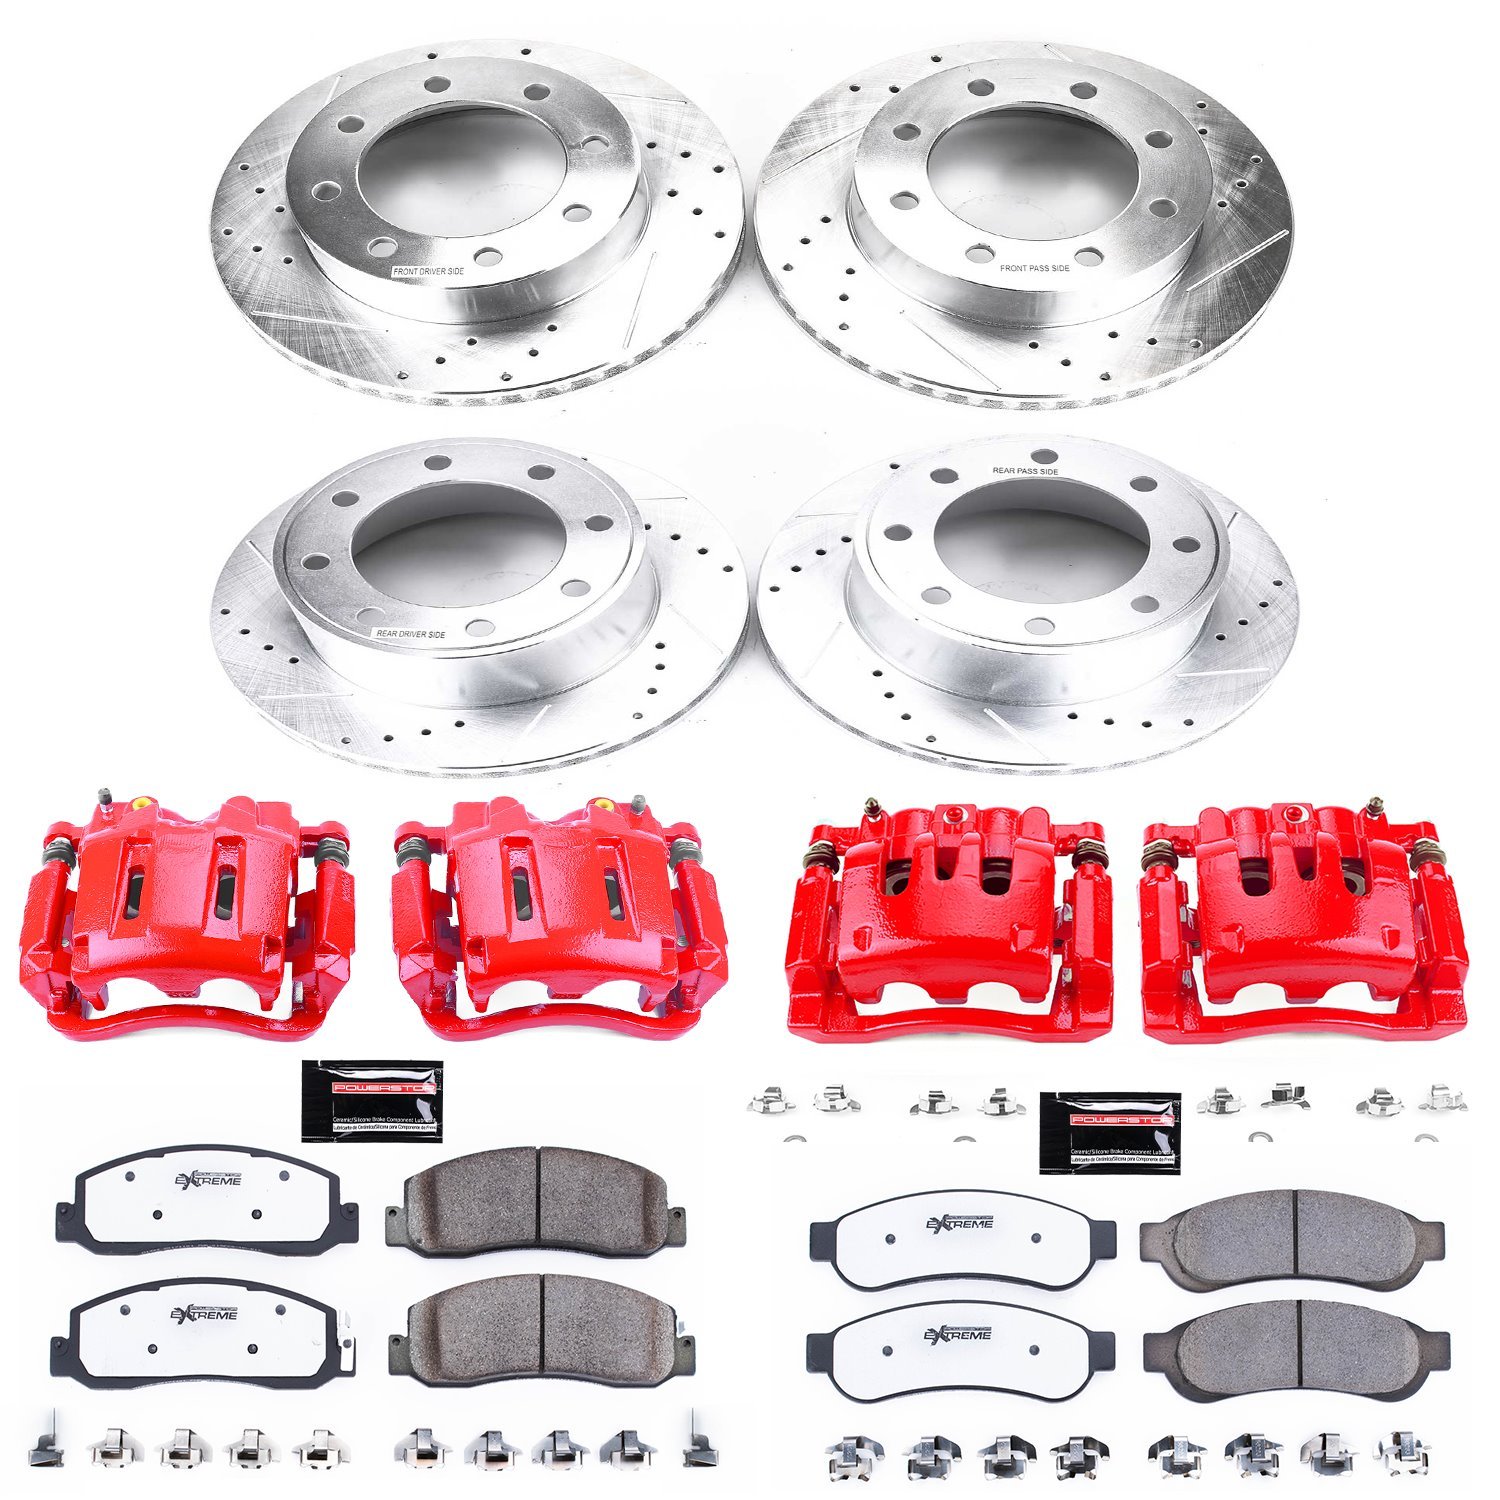 Truck and Towing Z36 Brake Upgrade Kit Cross-Drilled and Slotted Rotors Z36 Carbon Ceramic Brake Pad